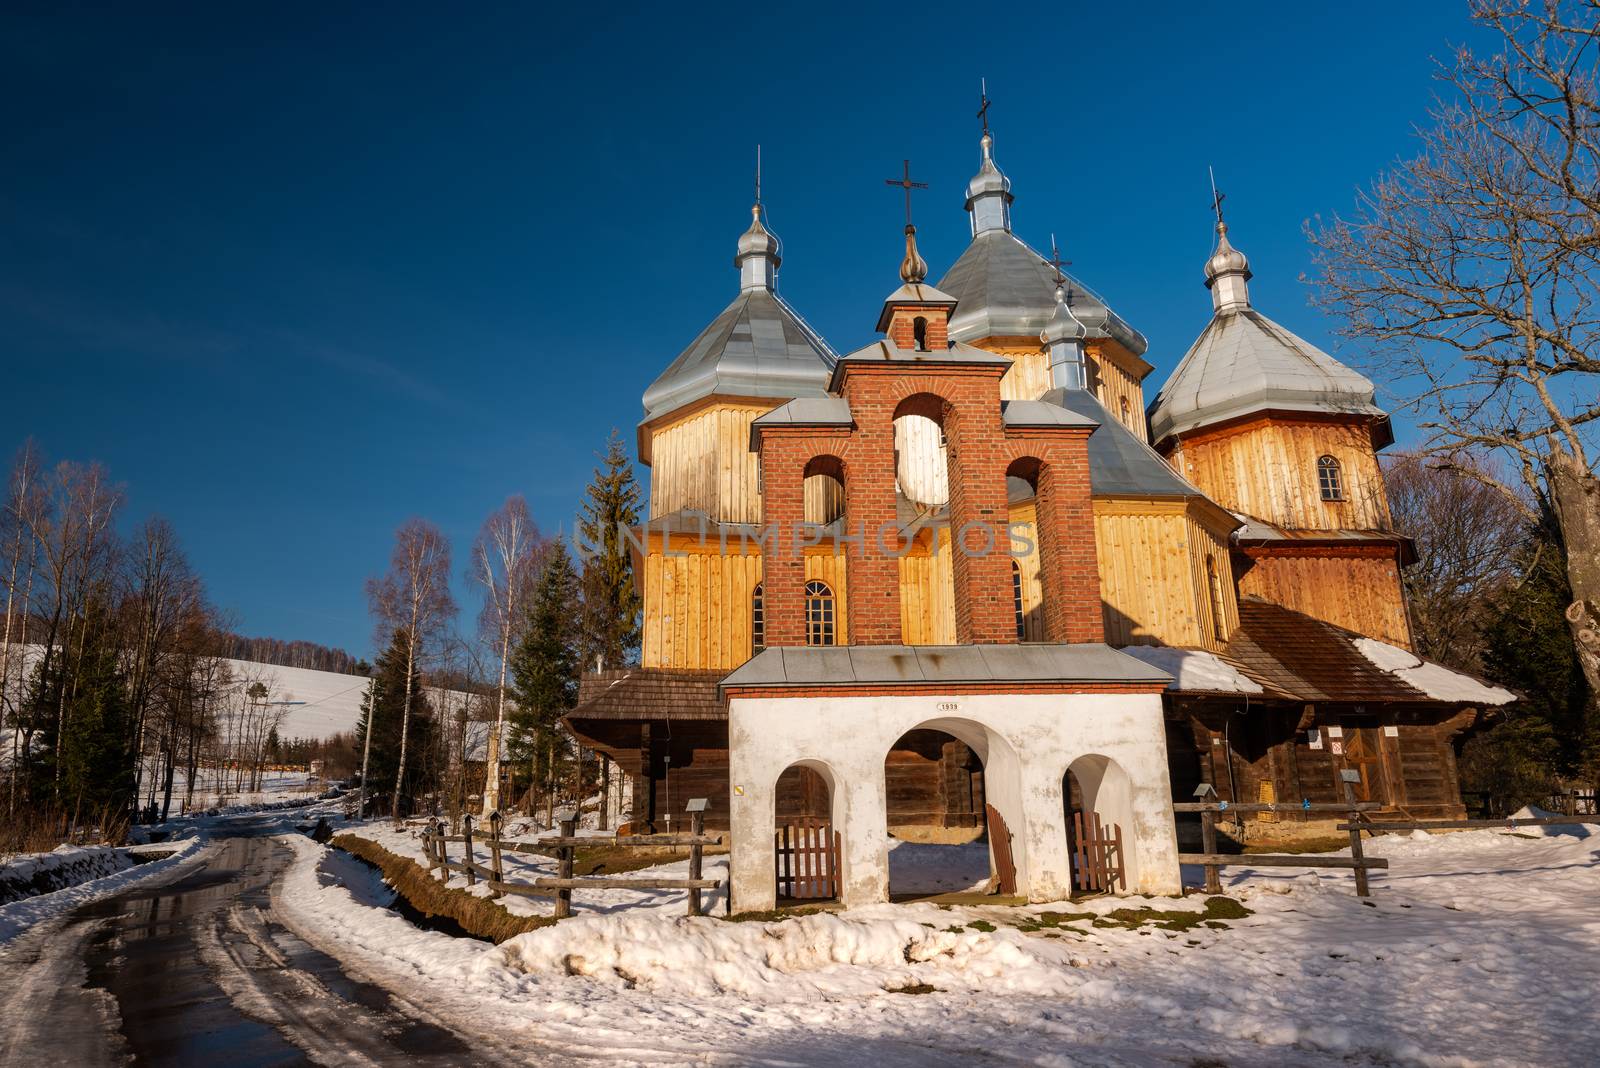 Wooden Orthodox Church in Bystre. Carpathian Mountains and Bieszczady Architecture in Winter.